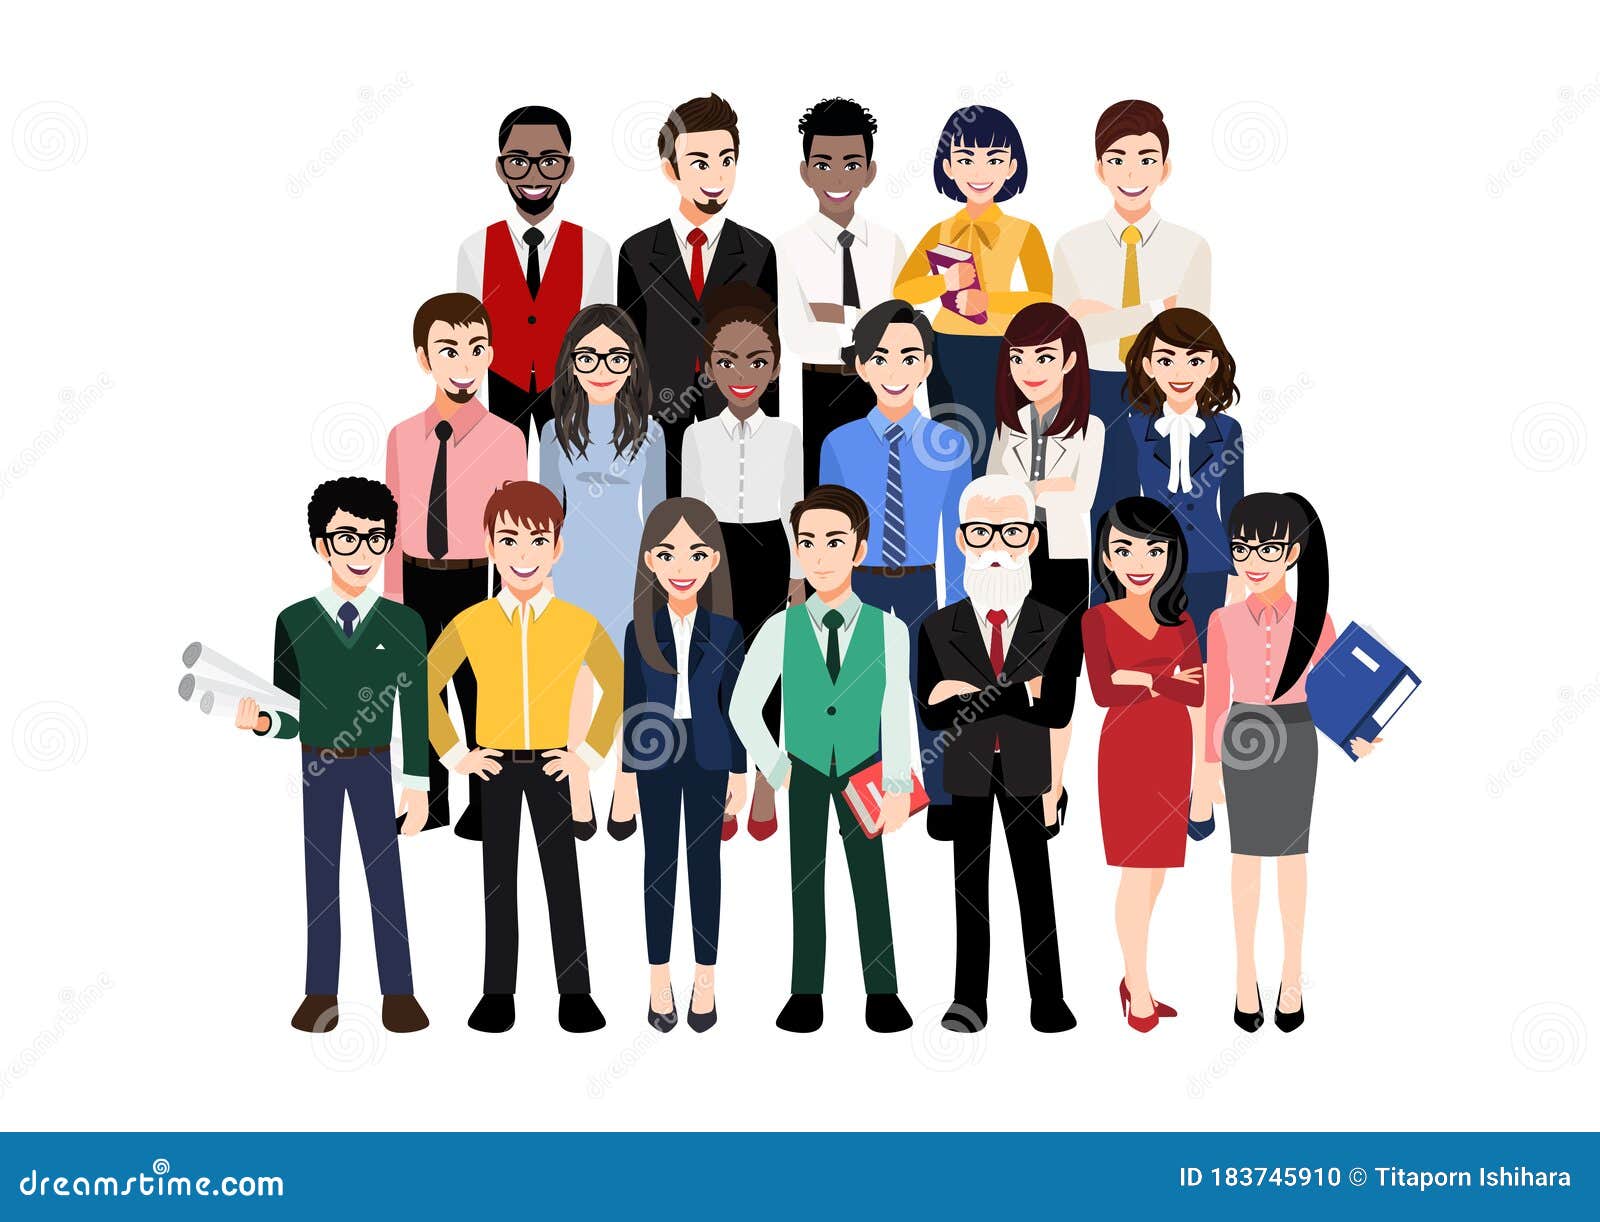 Cartoon Character with Modern Business Team. Vector Illustration of Diverse  Business People and Company Members, Standing Behind Stock Vector -  Illustration of icon, isolated: 183745910